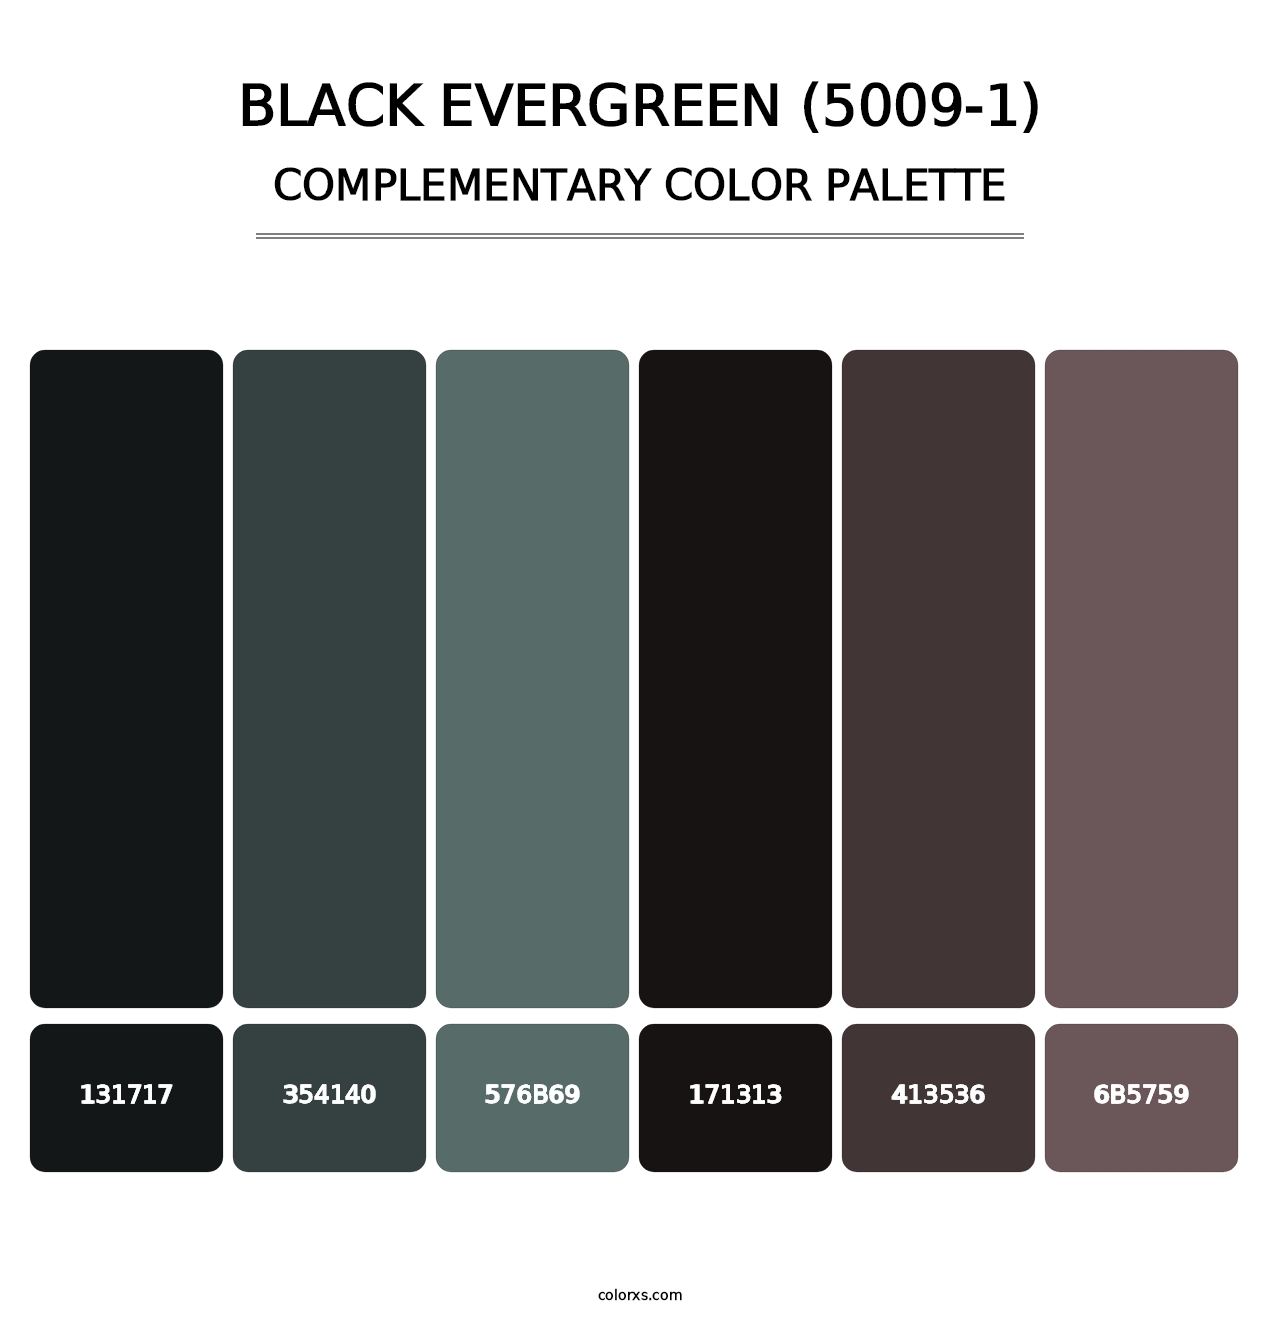 Black Evergreen (5009-1) - Complementary Color Palette